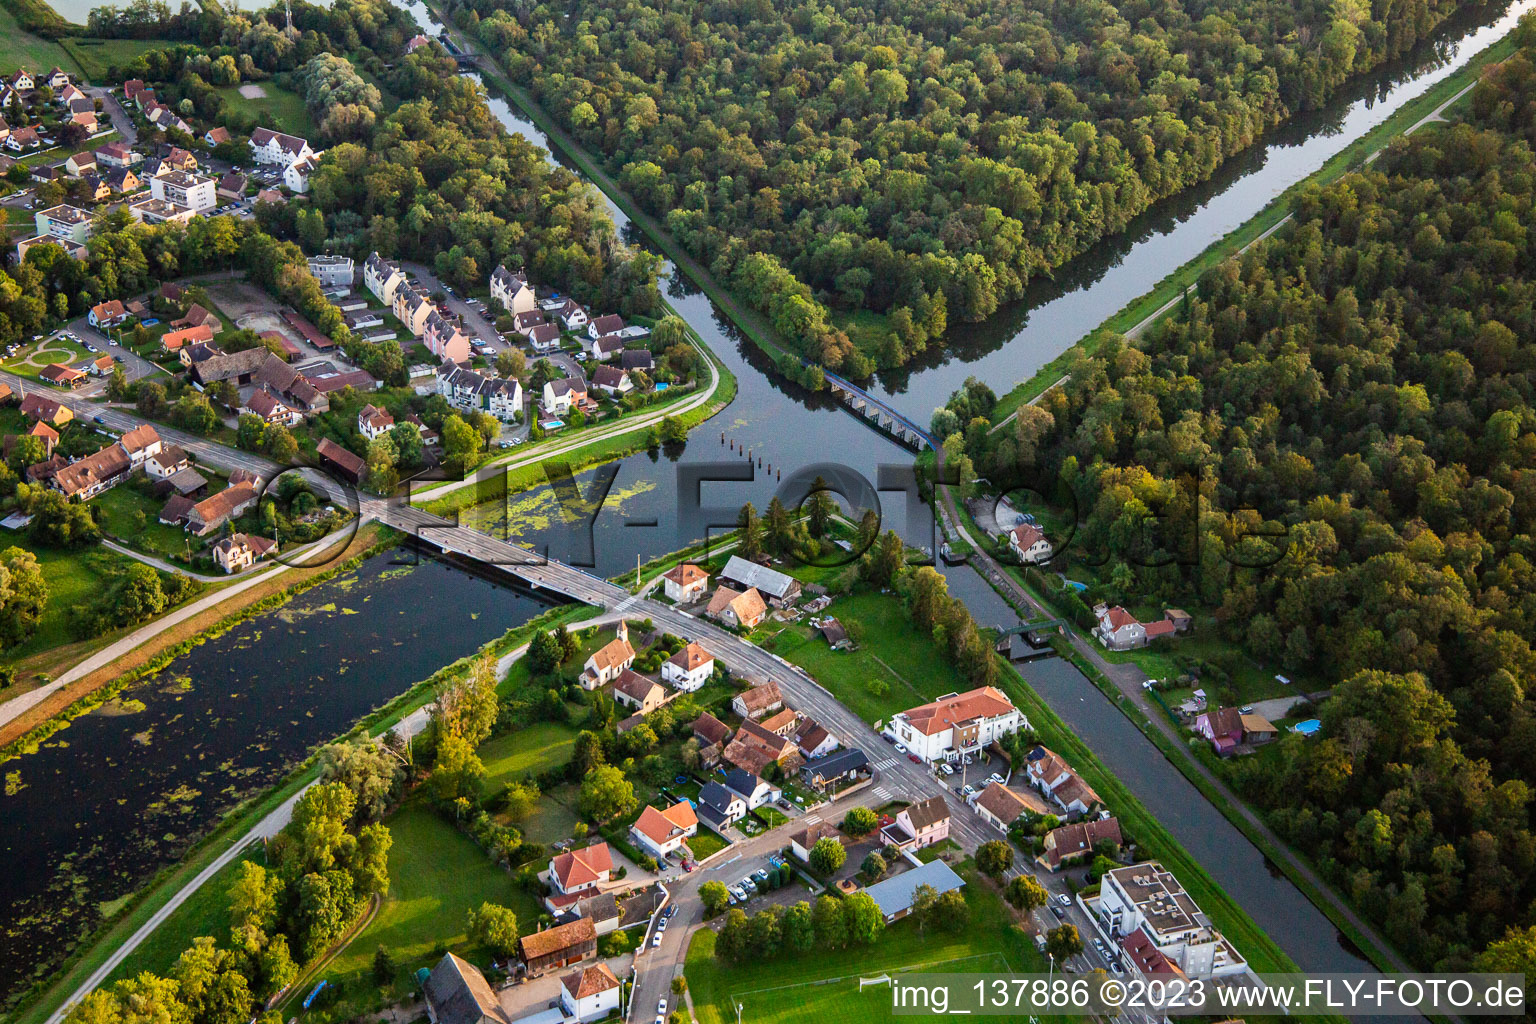 Aerial view of Junction of the Canal de Décharge de l'Ill and Canal du Rhône au Rhin in Erstein in the state Bas-Rhin, France